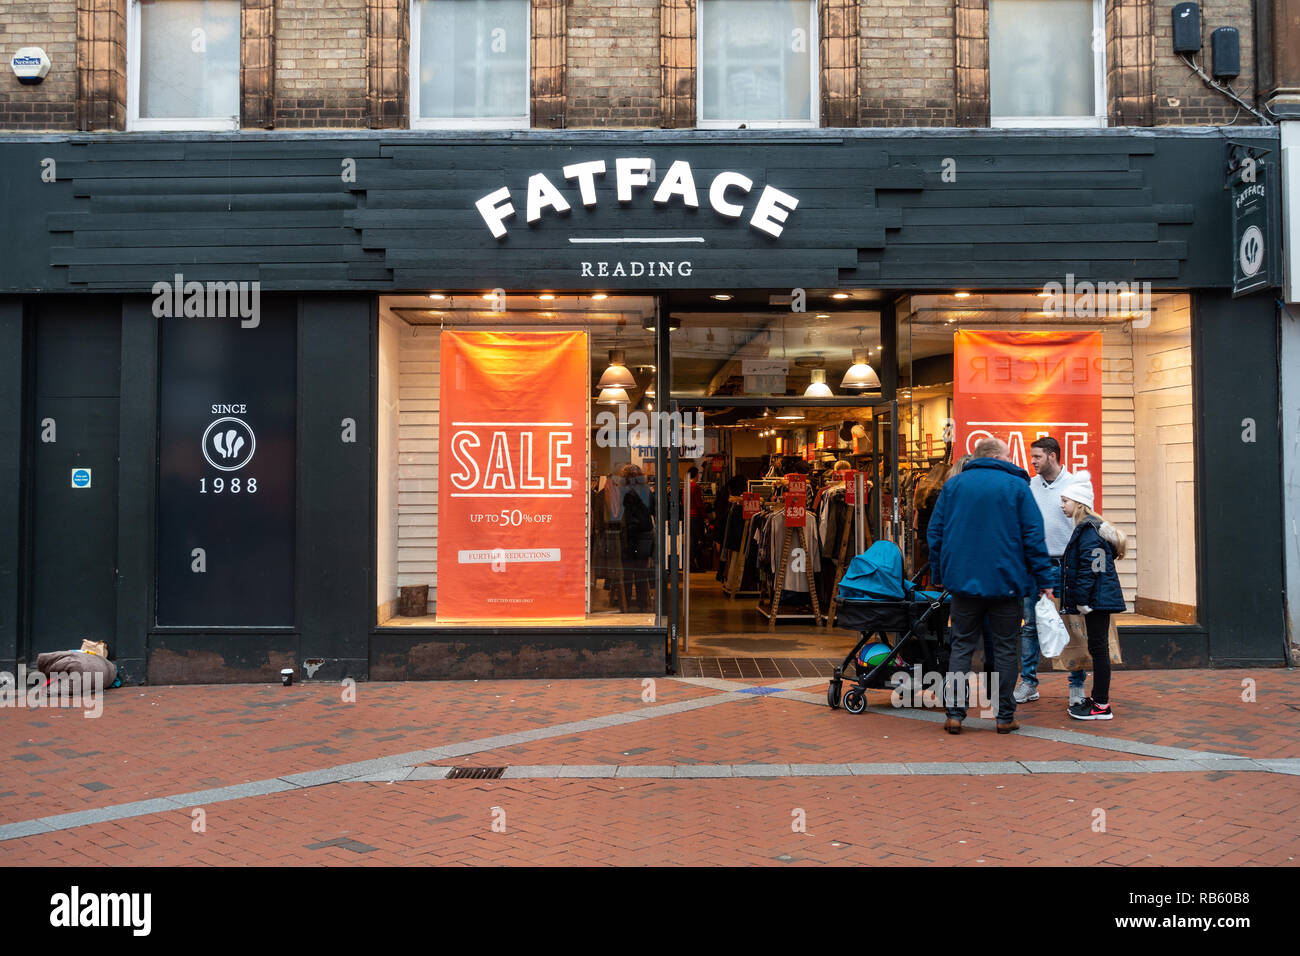 The Fatface store on Broad Street in Reading, Berkshire, UK Stock Photo